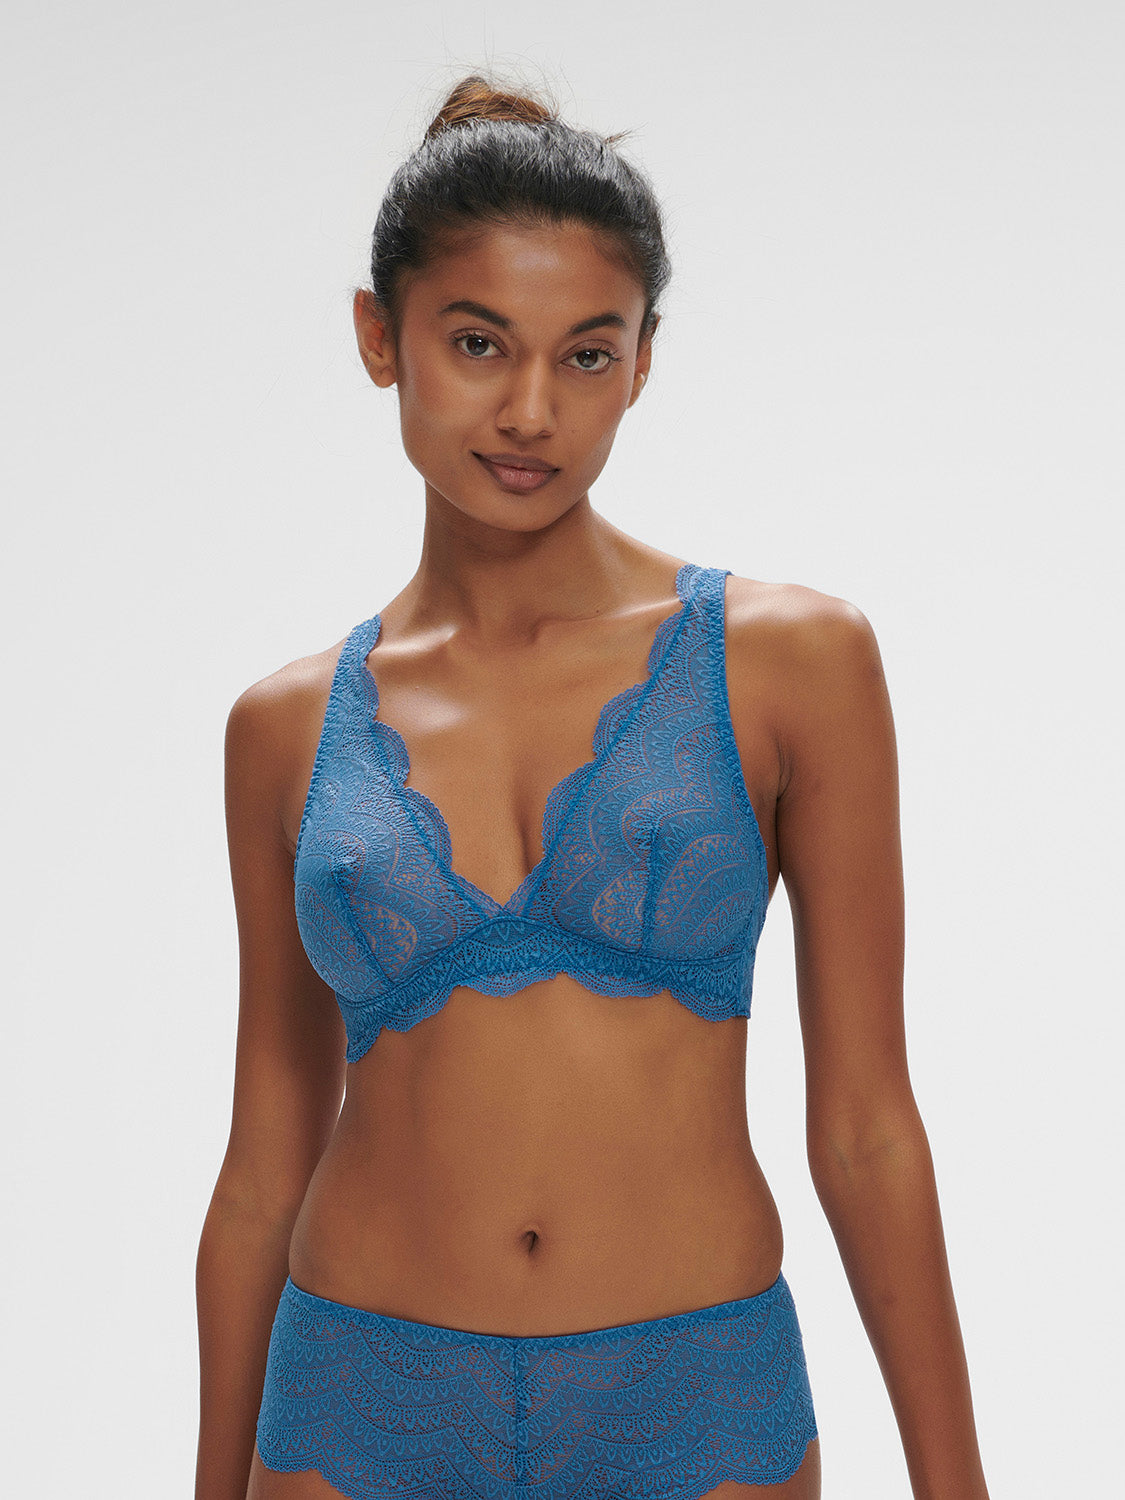 GARMONY Crop Top Style Padded Lace Tube Bra/Bralettle with